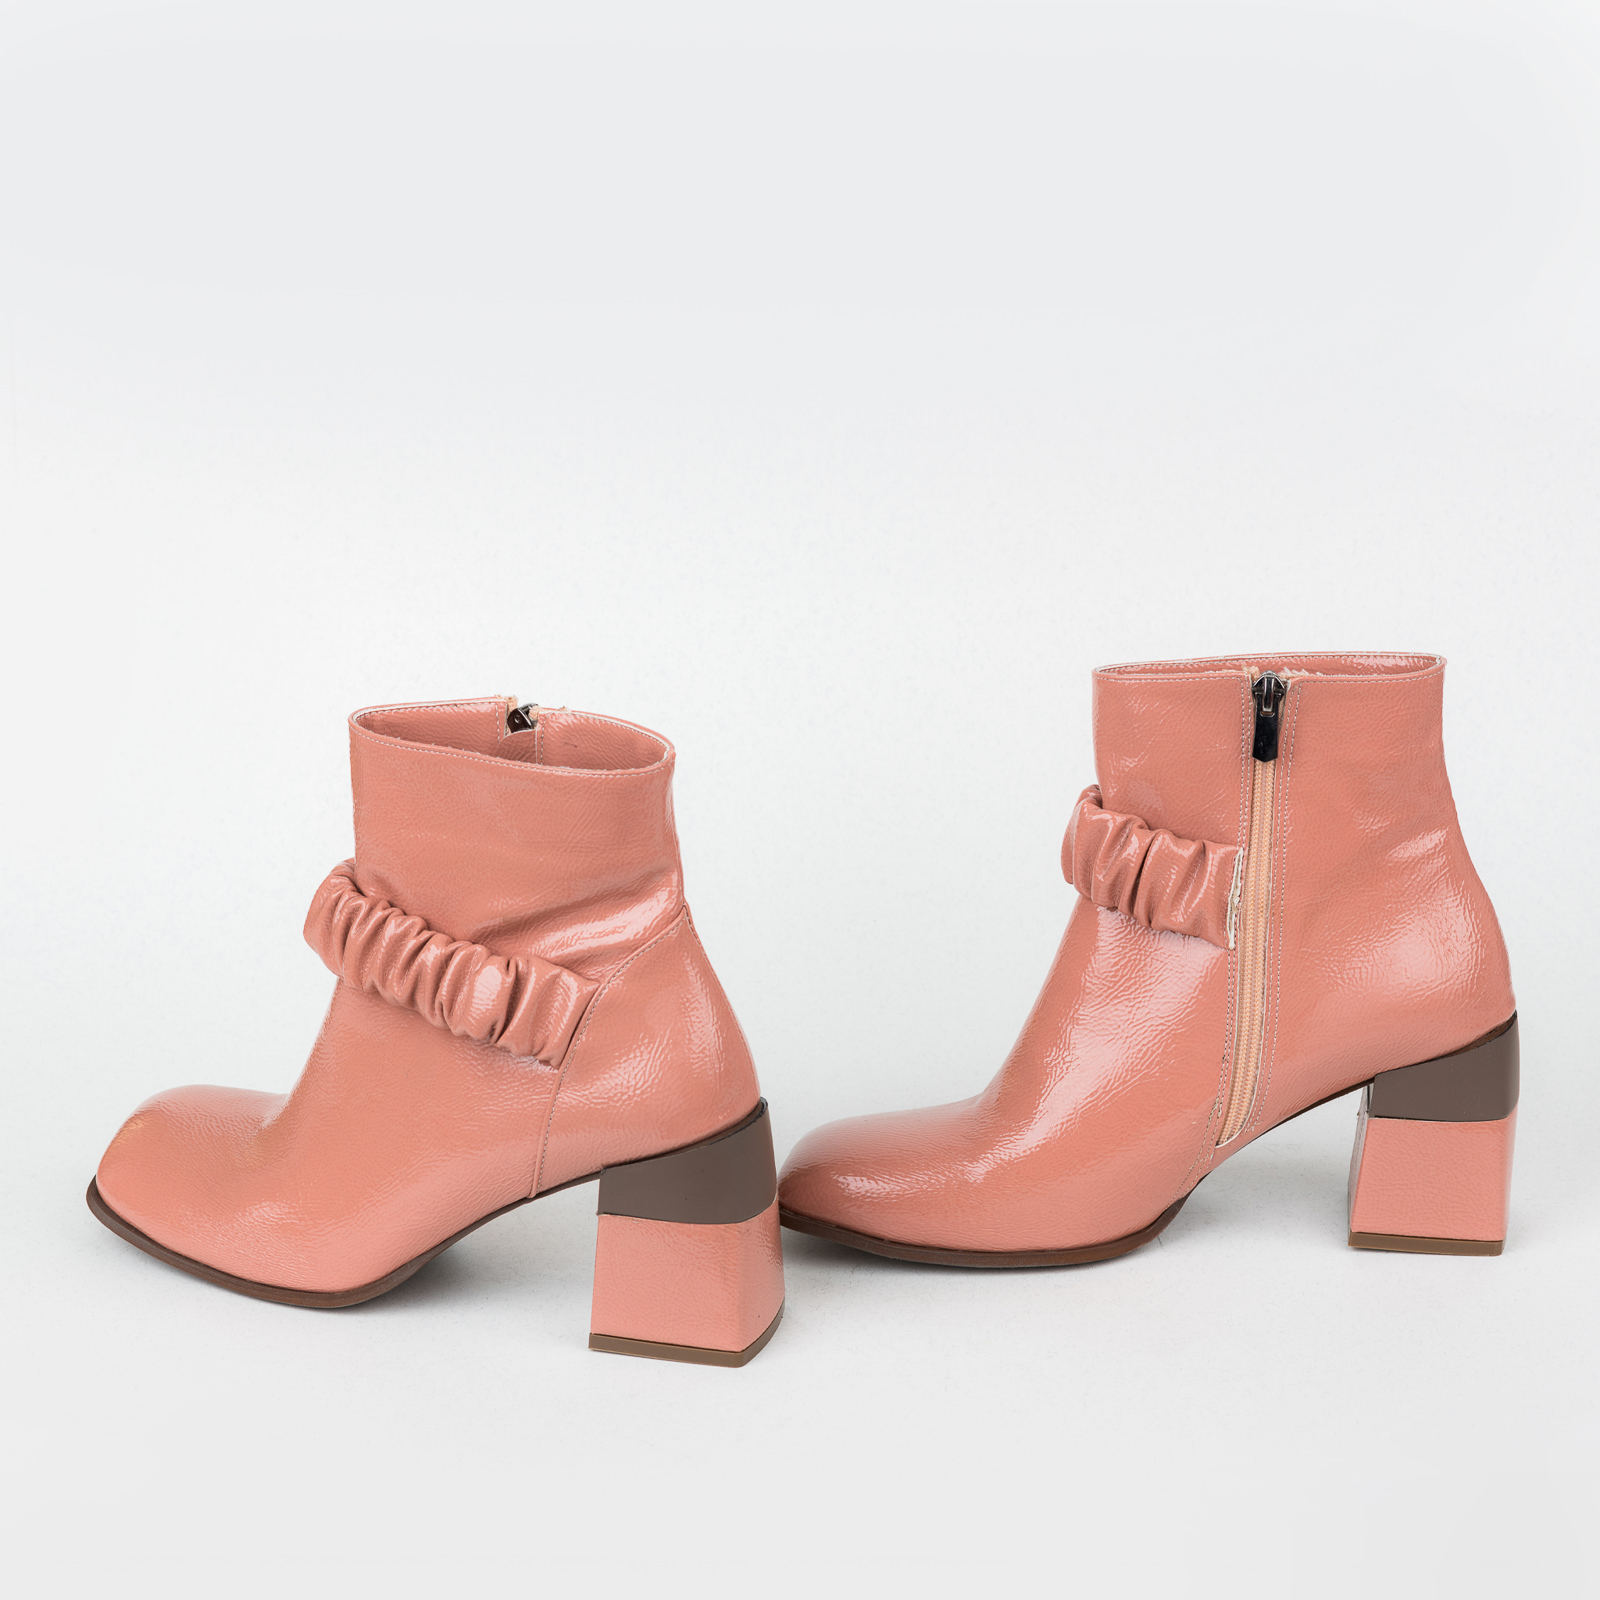 Women ankle boots B489 - ROSE